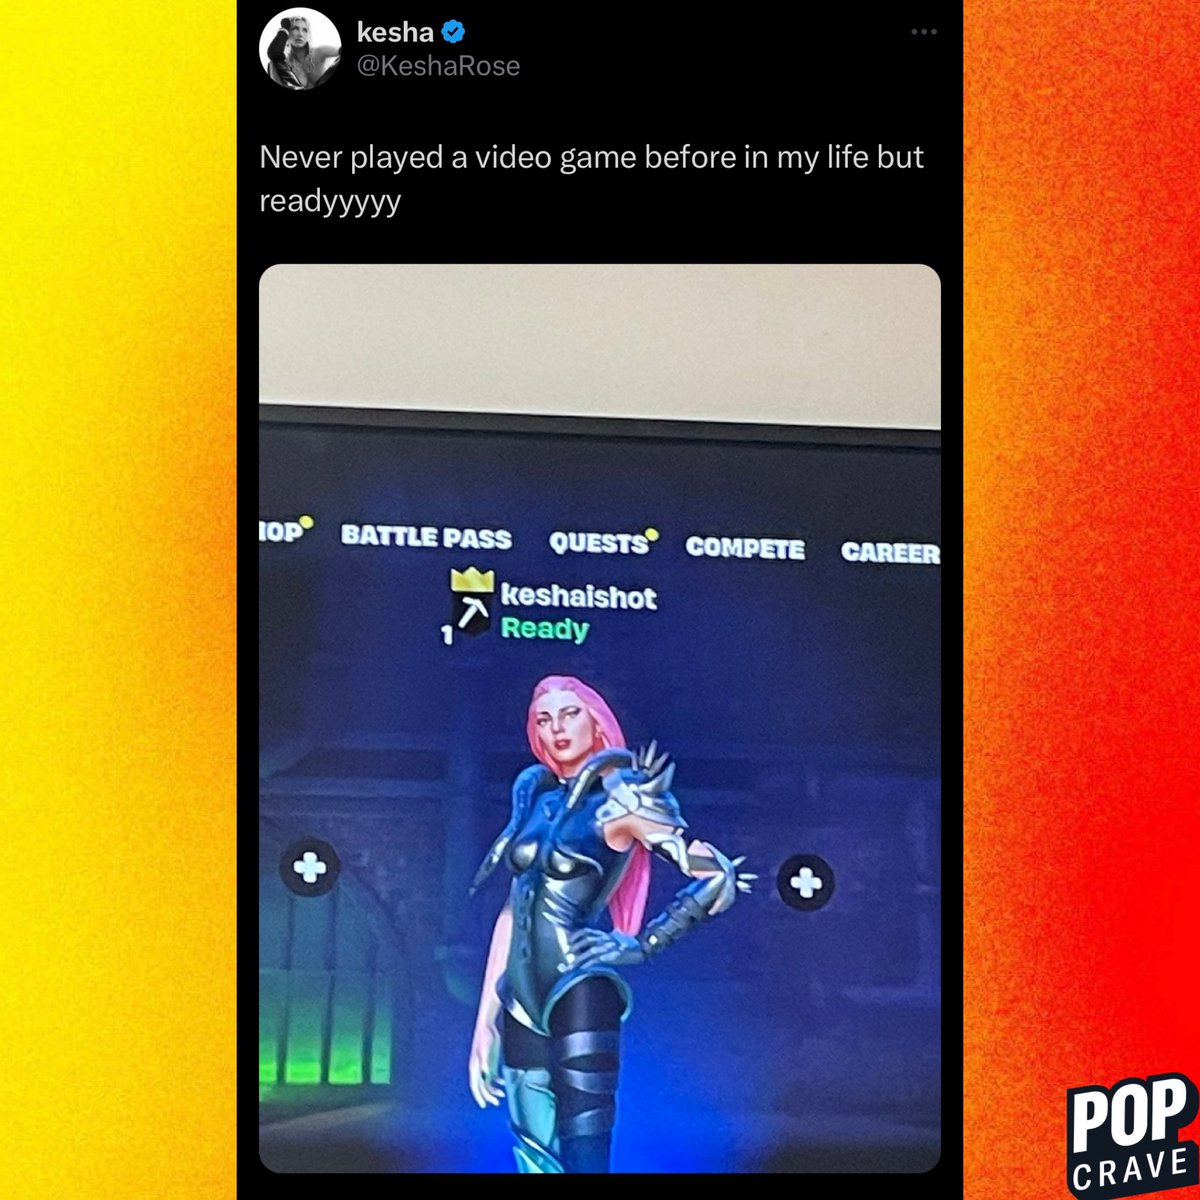 Kesha shares a photo using Lady Gaga’s Fortnite skin: “Never played a video game before in my life but readyyyyy”